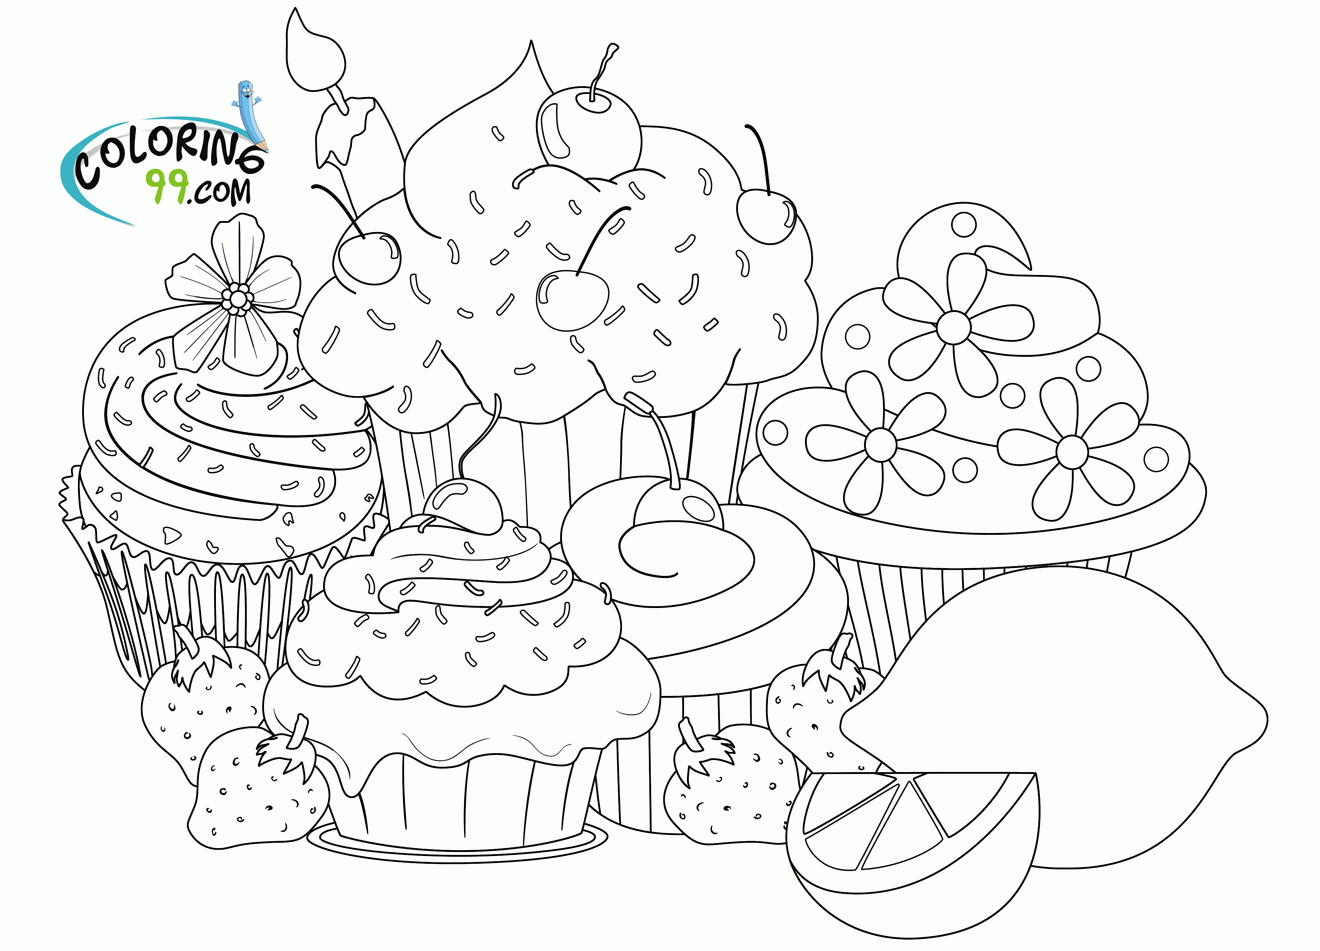 Amazing of Great Cupcake Coloring Pages For Kids At Cupca #2059